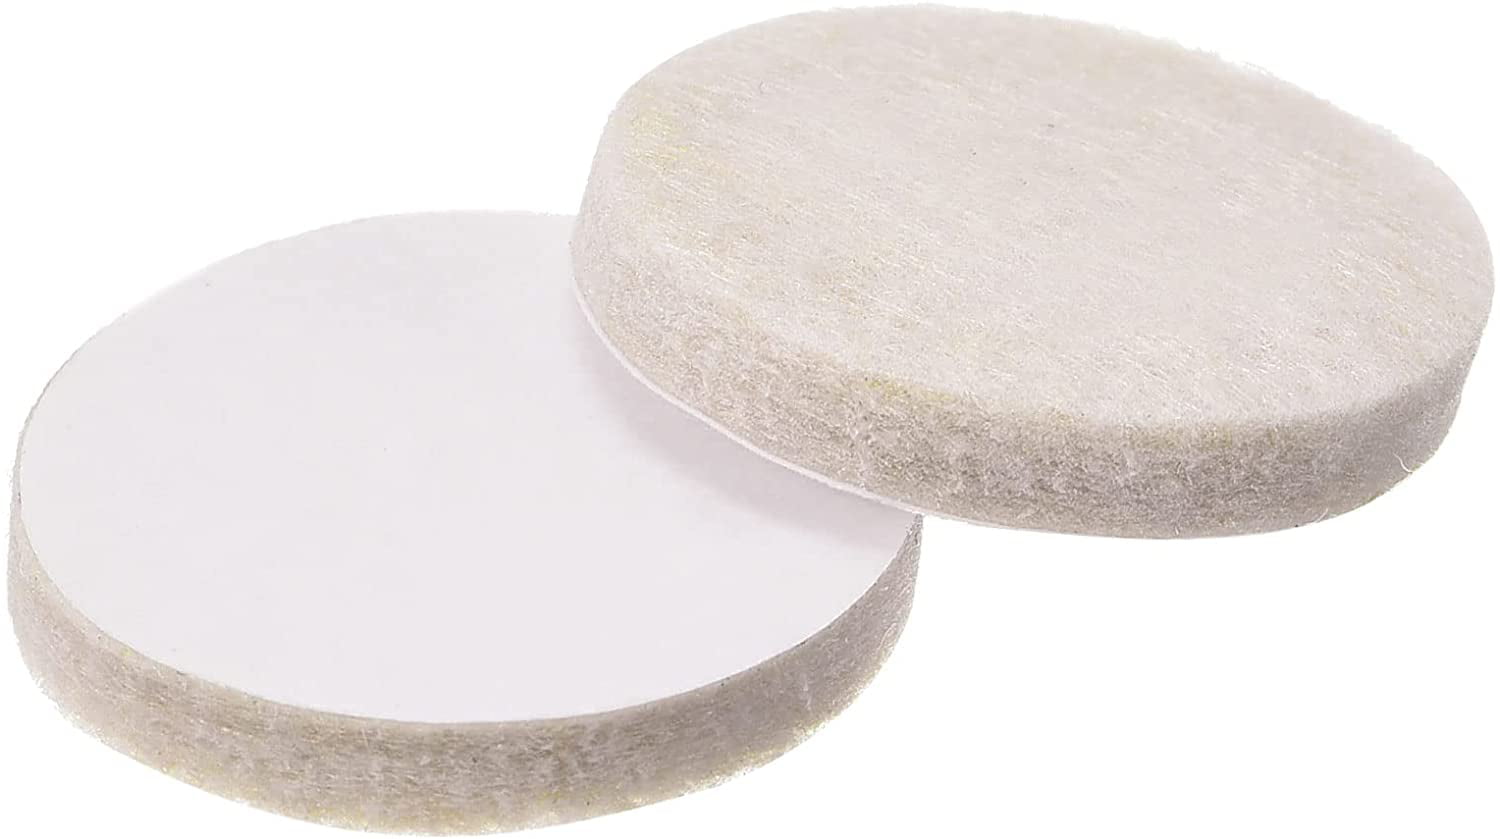 FELT PADS 25mm beige self adhesive round furniture protectors extra sticky 128 